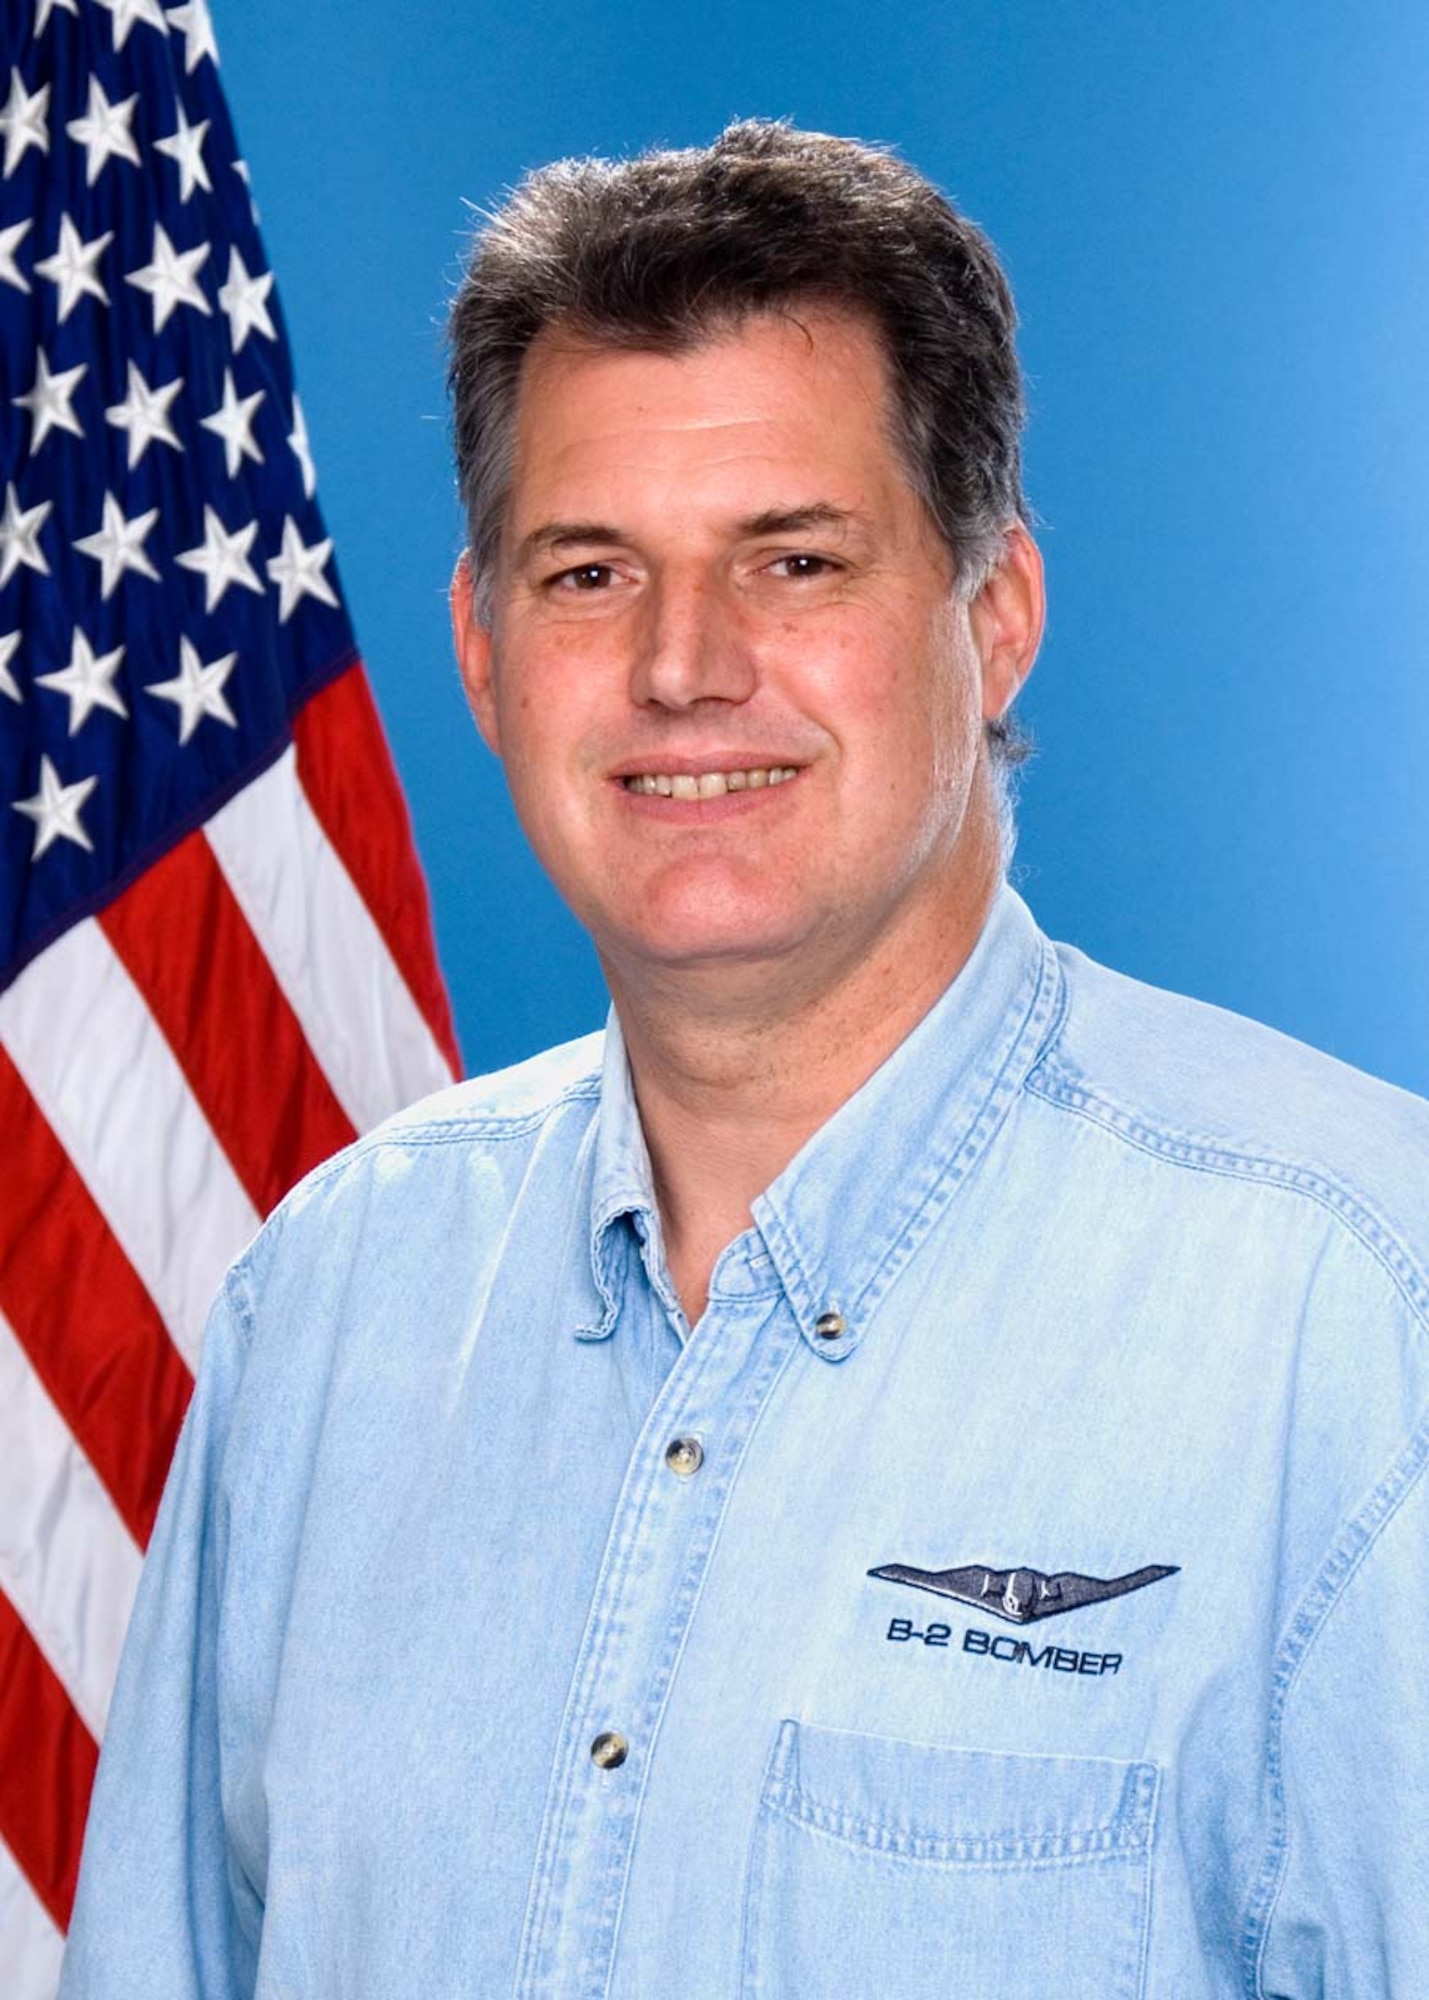 Mr. James Worden from the Air Force Operational Test and Evaluation Center's Detachment 5 at Edwards AFB, Calif., is the 2009 AFOTEC Category IV Civilian of the Year.